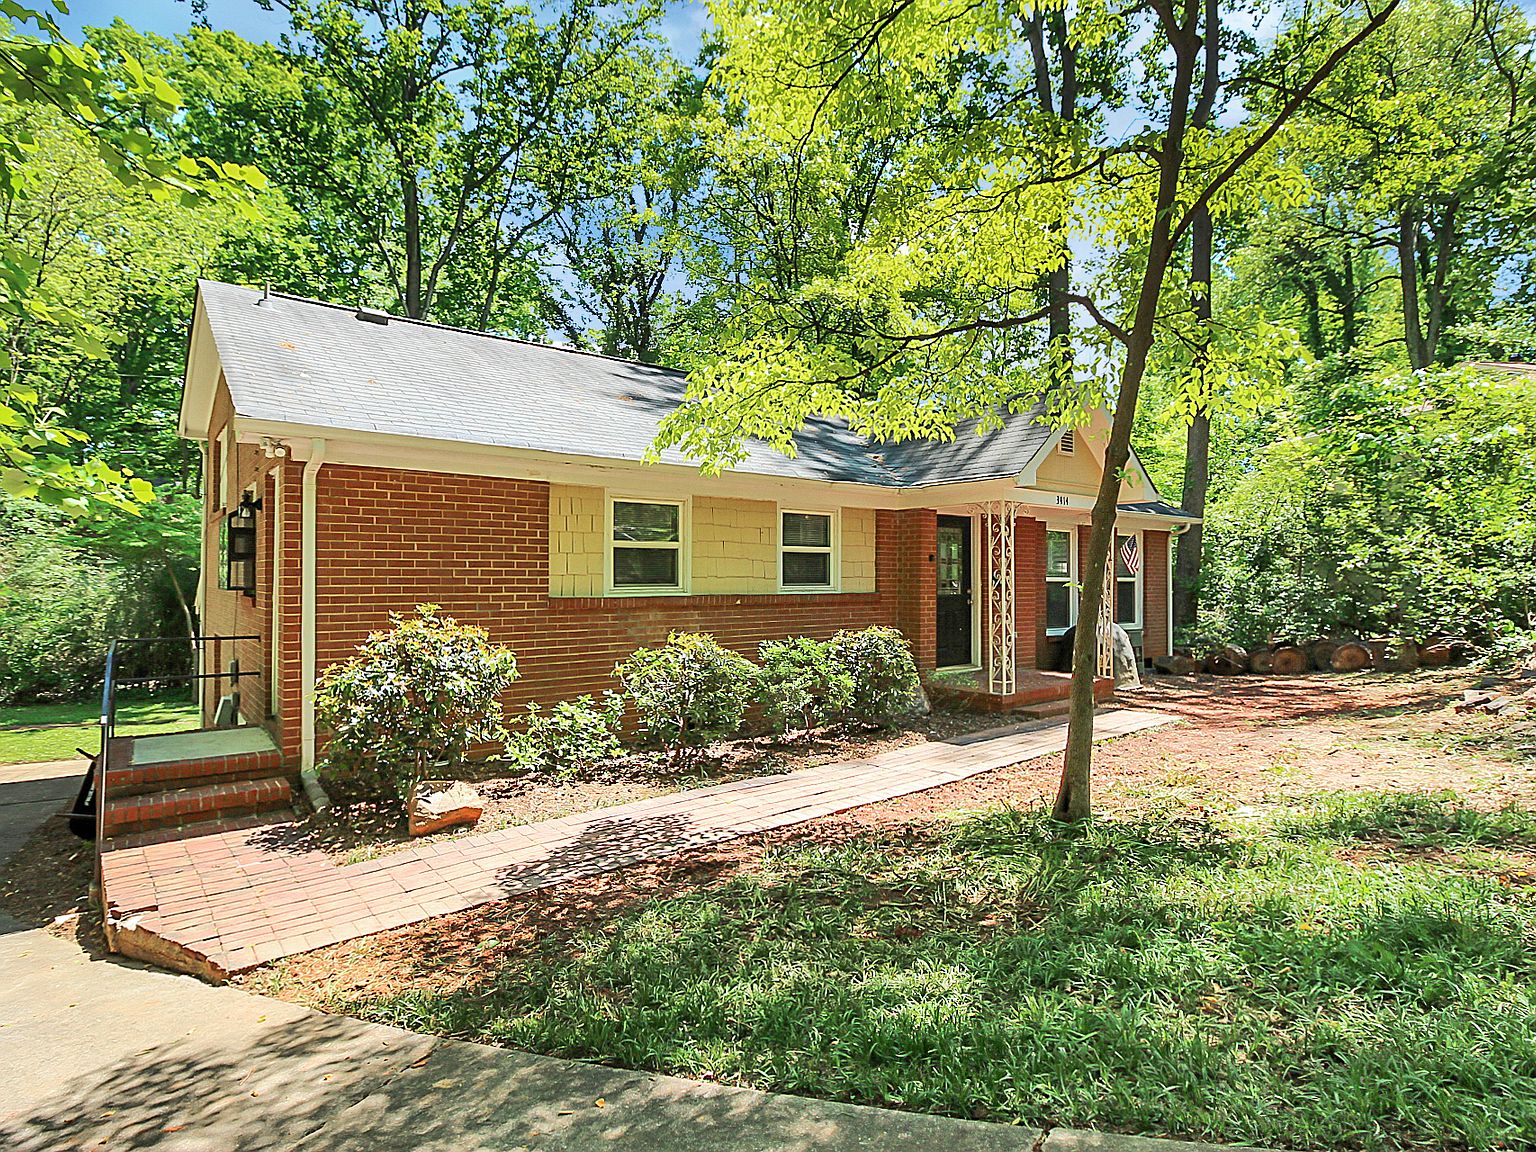 2518 Tower Ct, Charlotte, NC 28209 - MLS #3657181 - Zillow